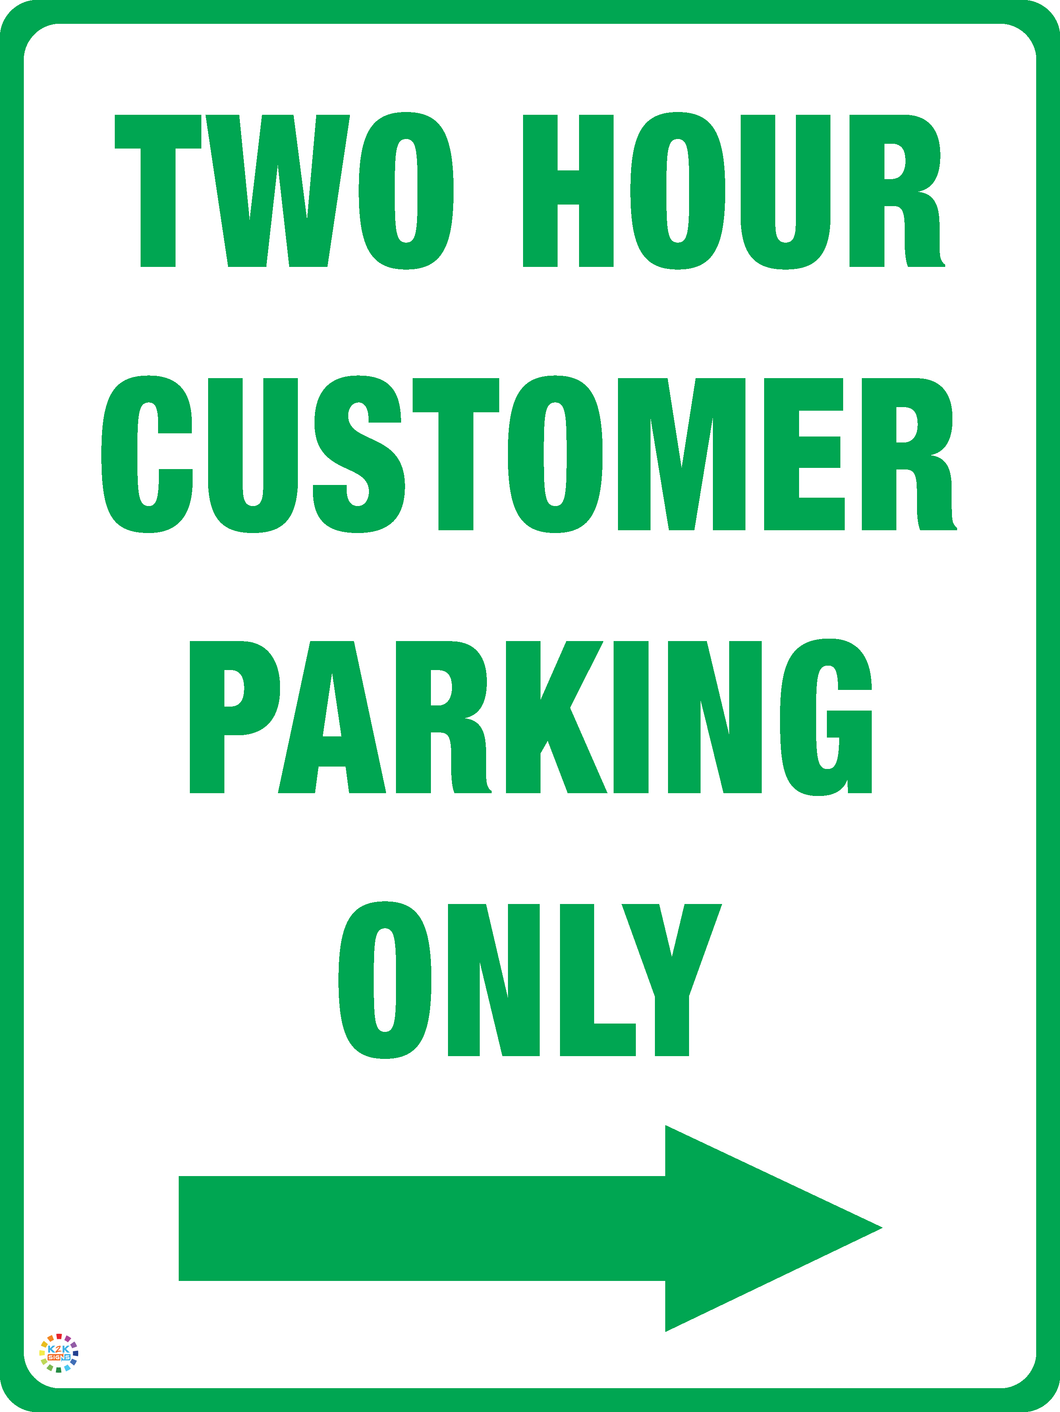 Two Hour Customer Parking Only (Right Arrow) Sign